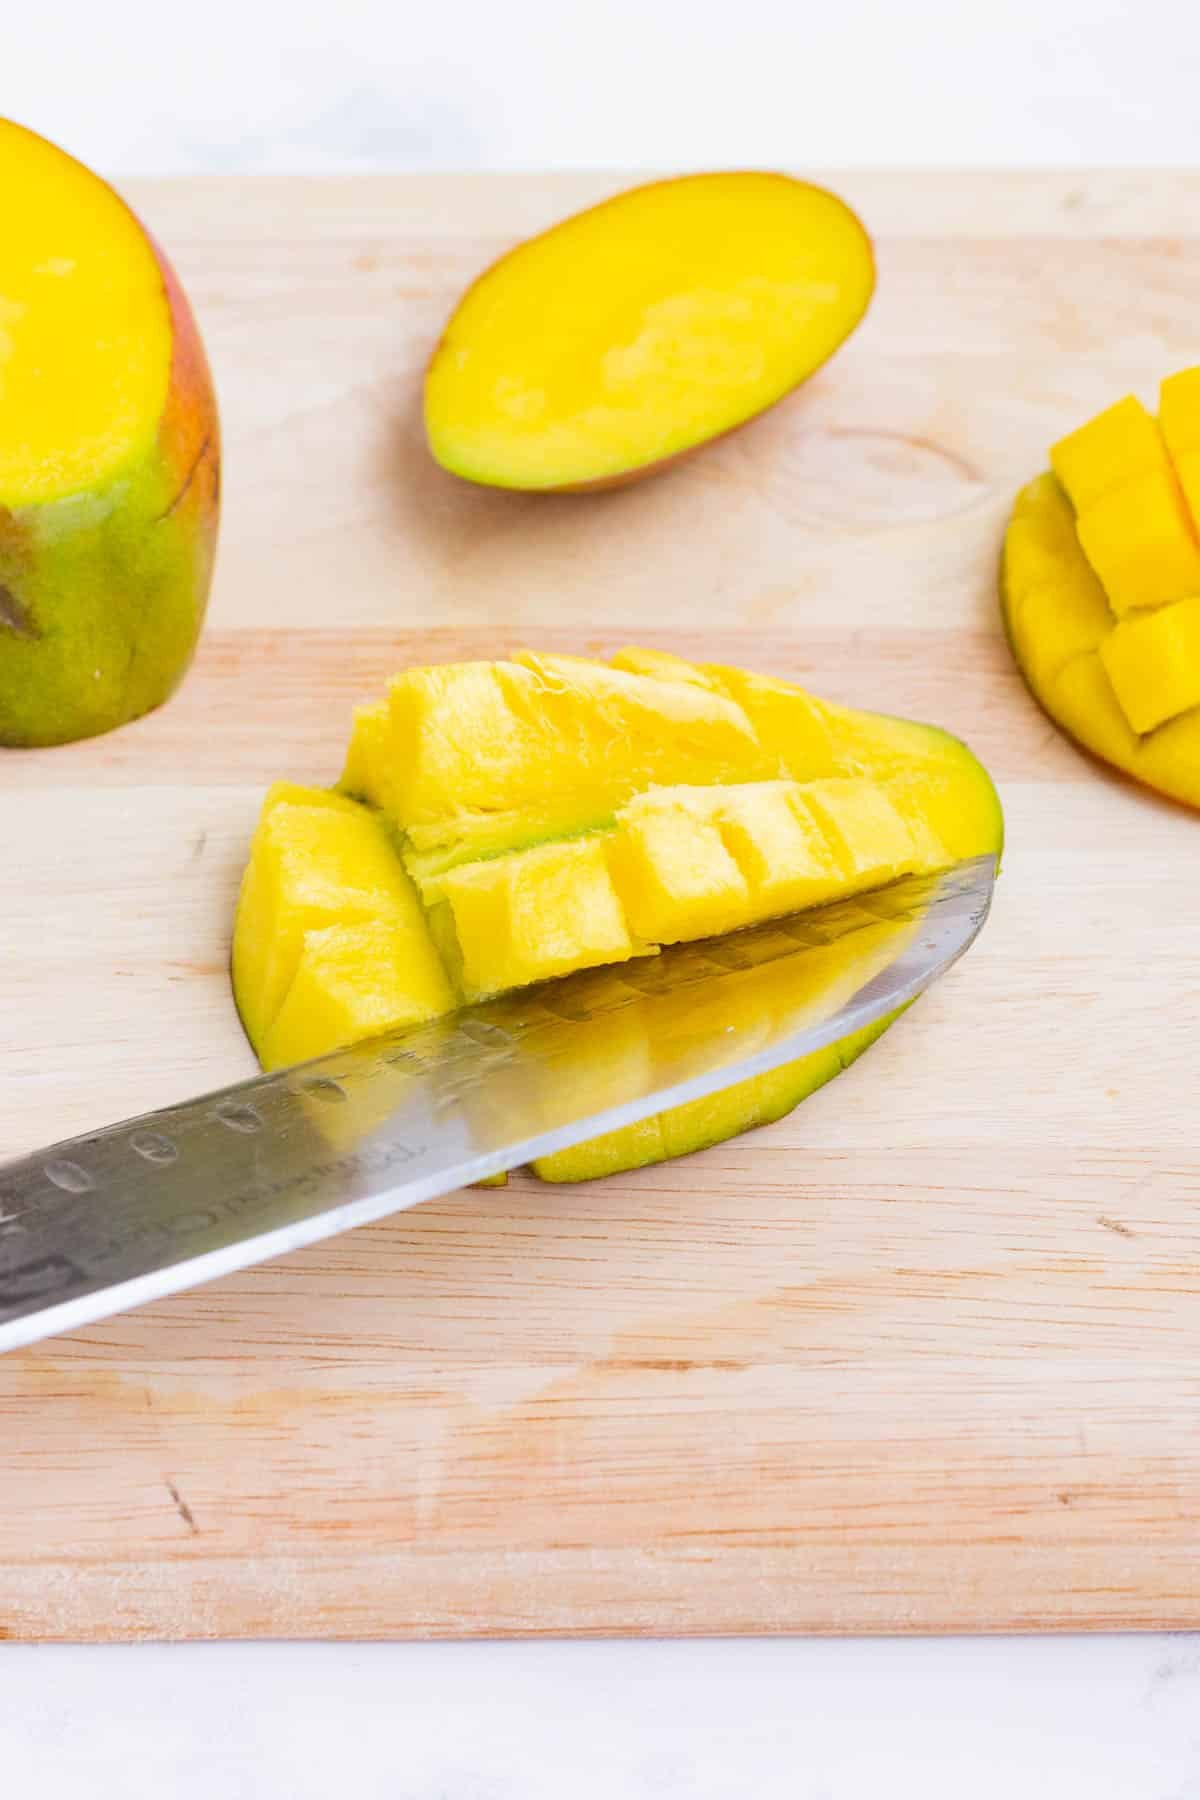 A sharp knife cuts a mango into small pieces.